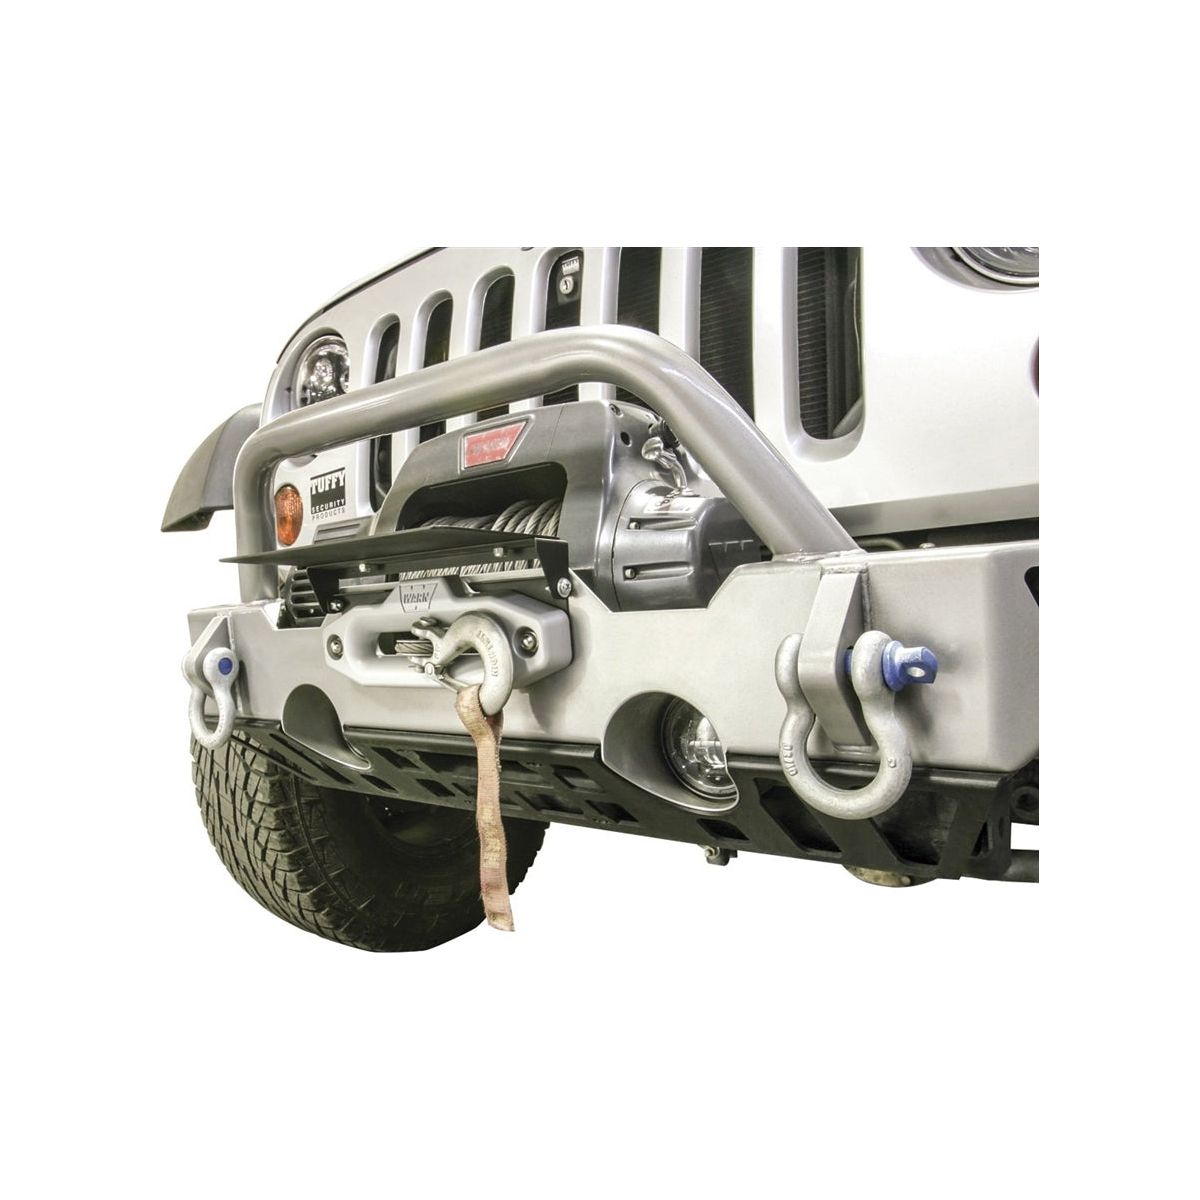 Tuffy Flip-Up License Plate Holder for Winch (Universal Fit)